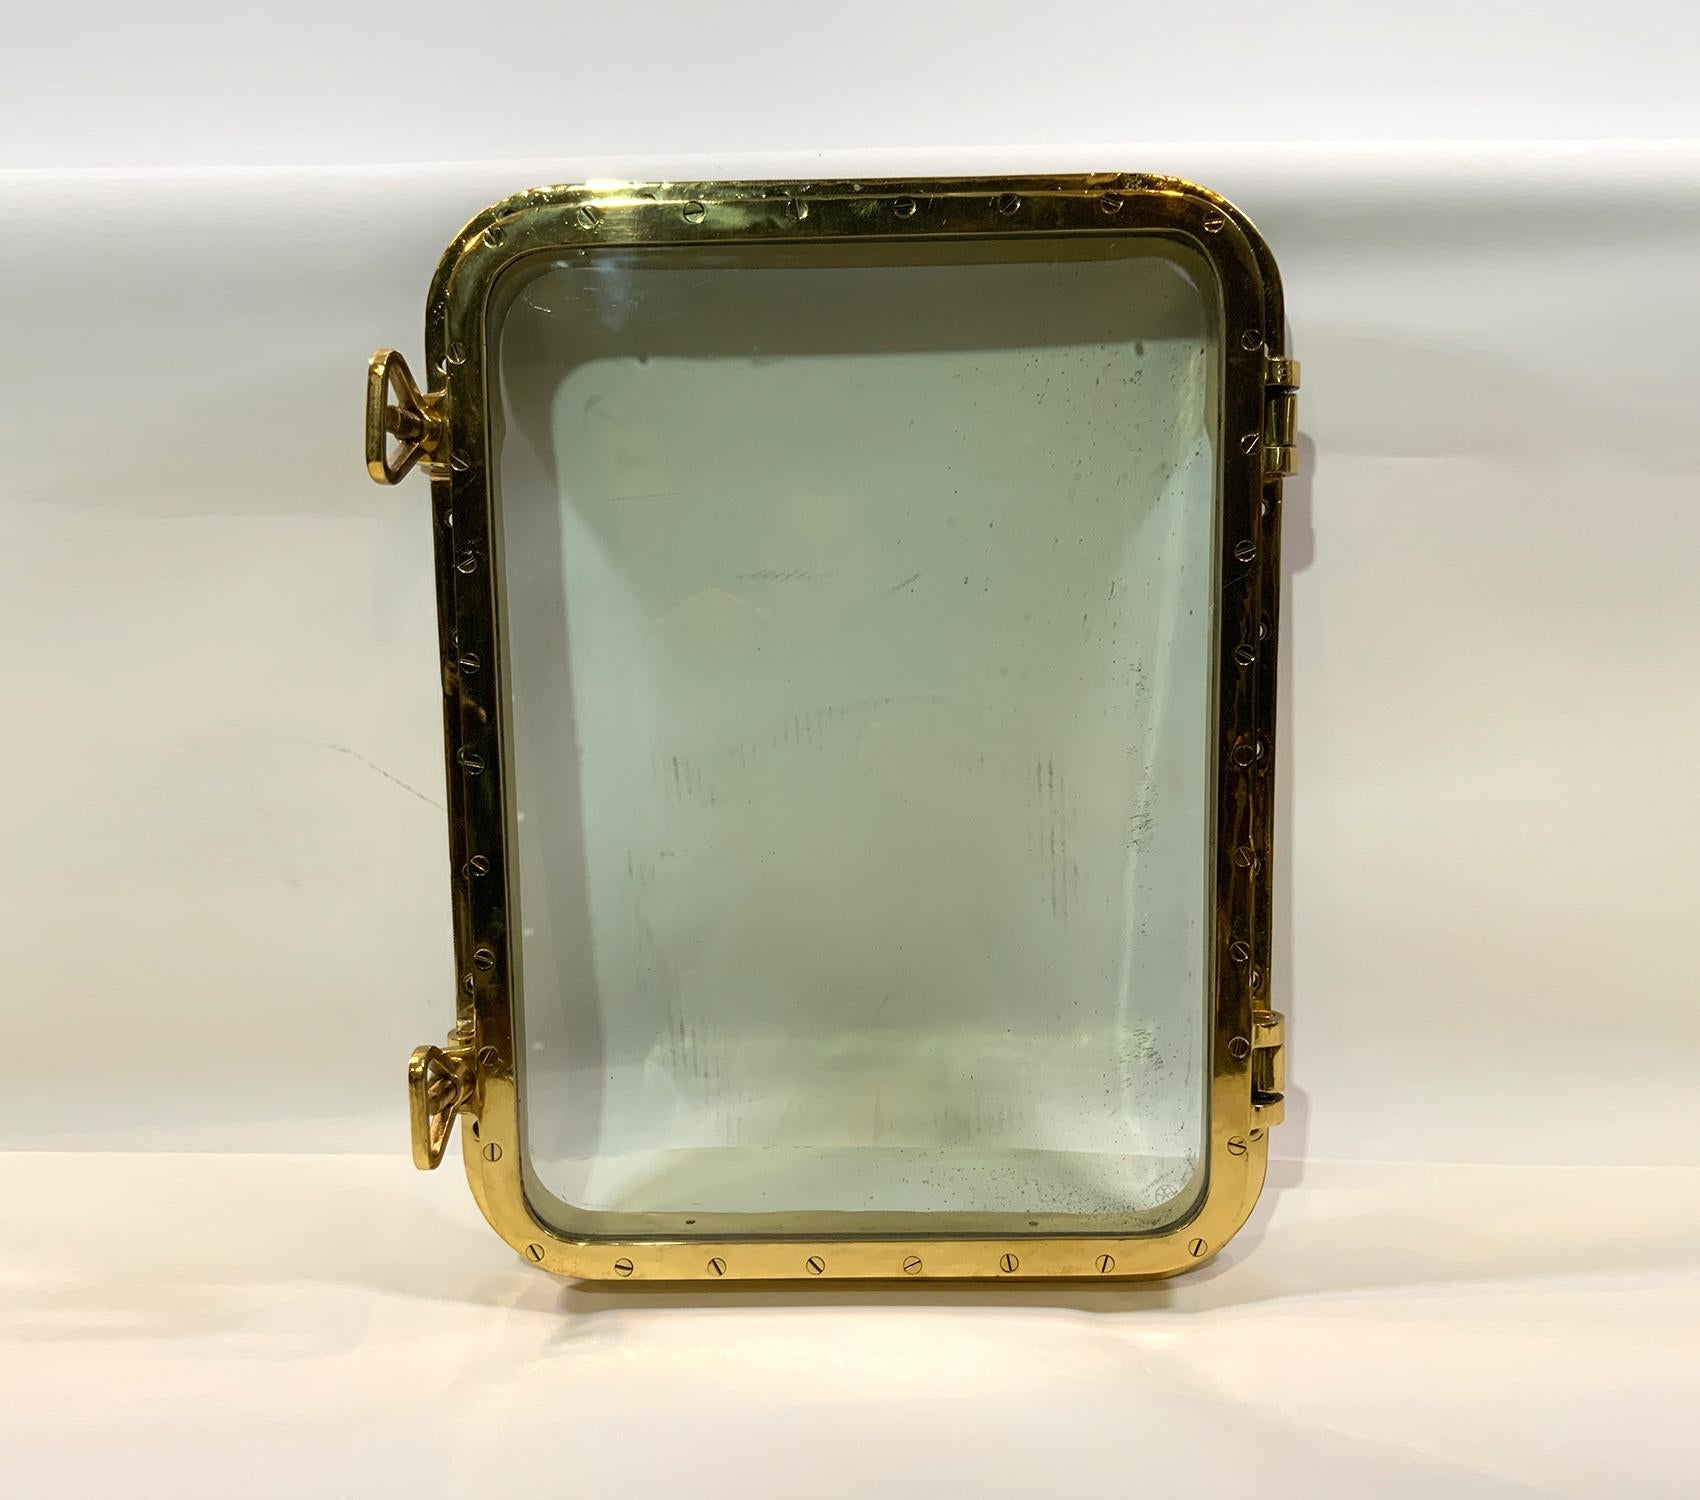 Large highly polished and lacquered ships porthole. First class restoration. Two dog bolts, hinged door. Very heavy.

Weight: 65 LBS
Overall dimensions: 22” H x 29